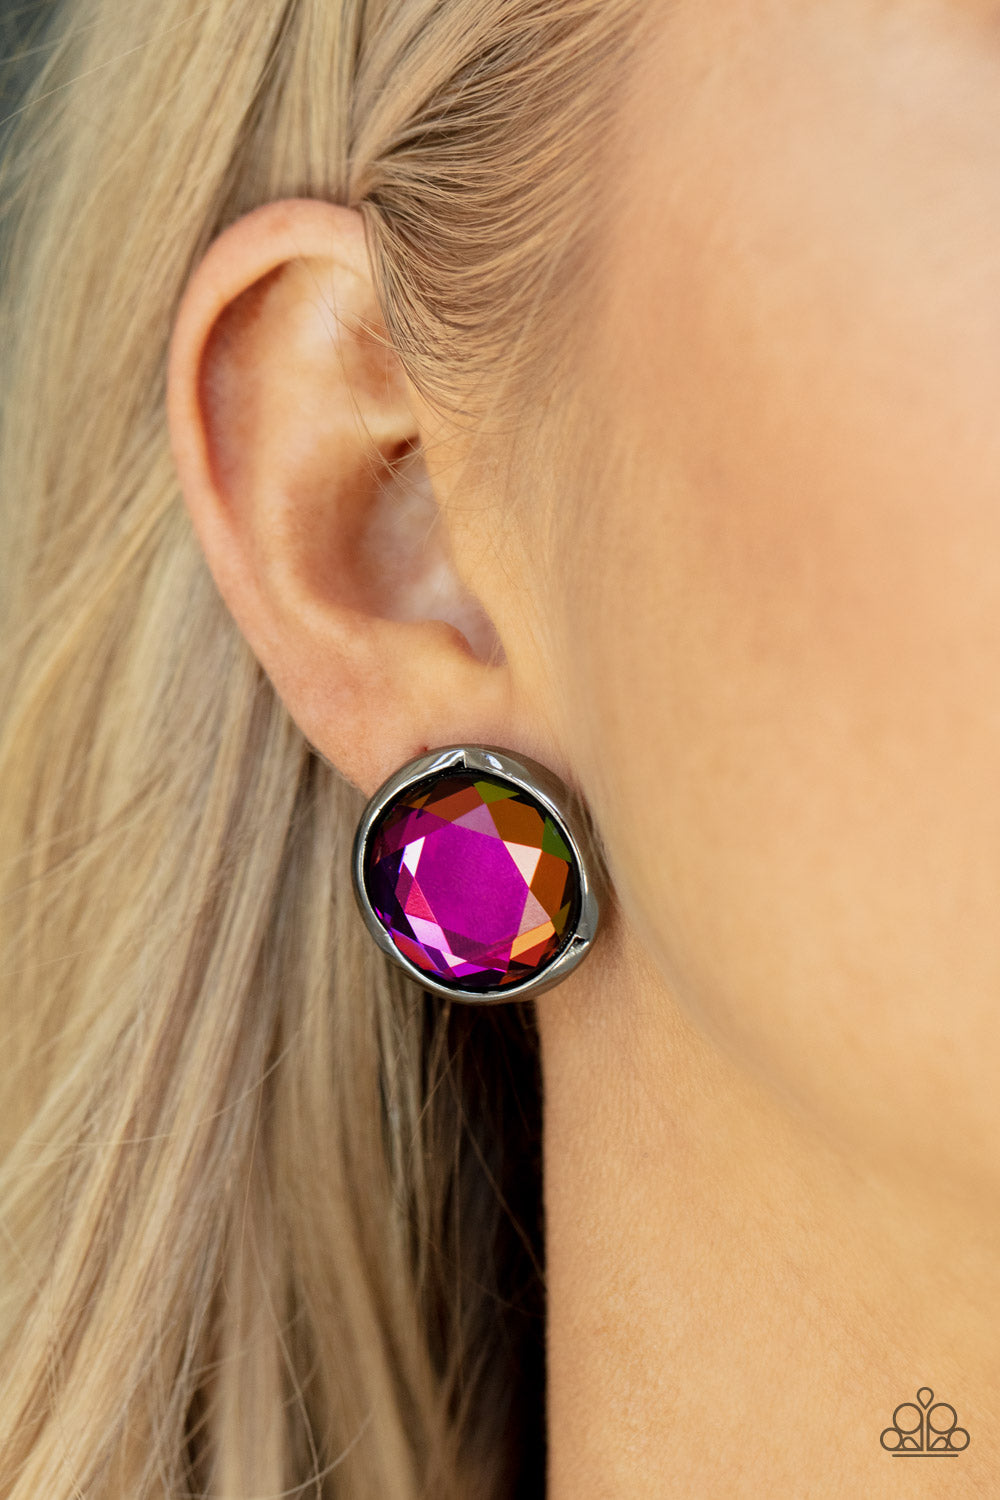 Double-Take Twinkle Oil Spill Post Earring - Paparazzi Accessories  Featuring a flashy faceted finish, an oversized oil spill gem is pressed into a sleek gunmetal fitting for a dramatic pop of dazzle. Earring attaches to a standard post fitting.  Sold as one pair of post earrings.